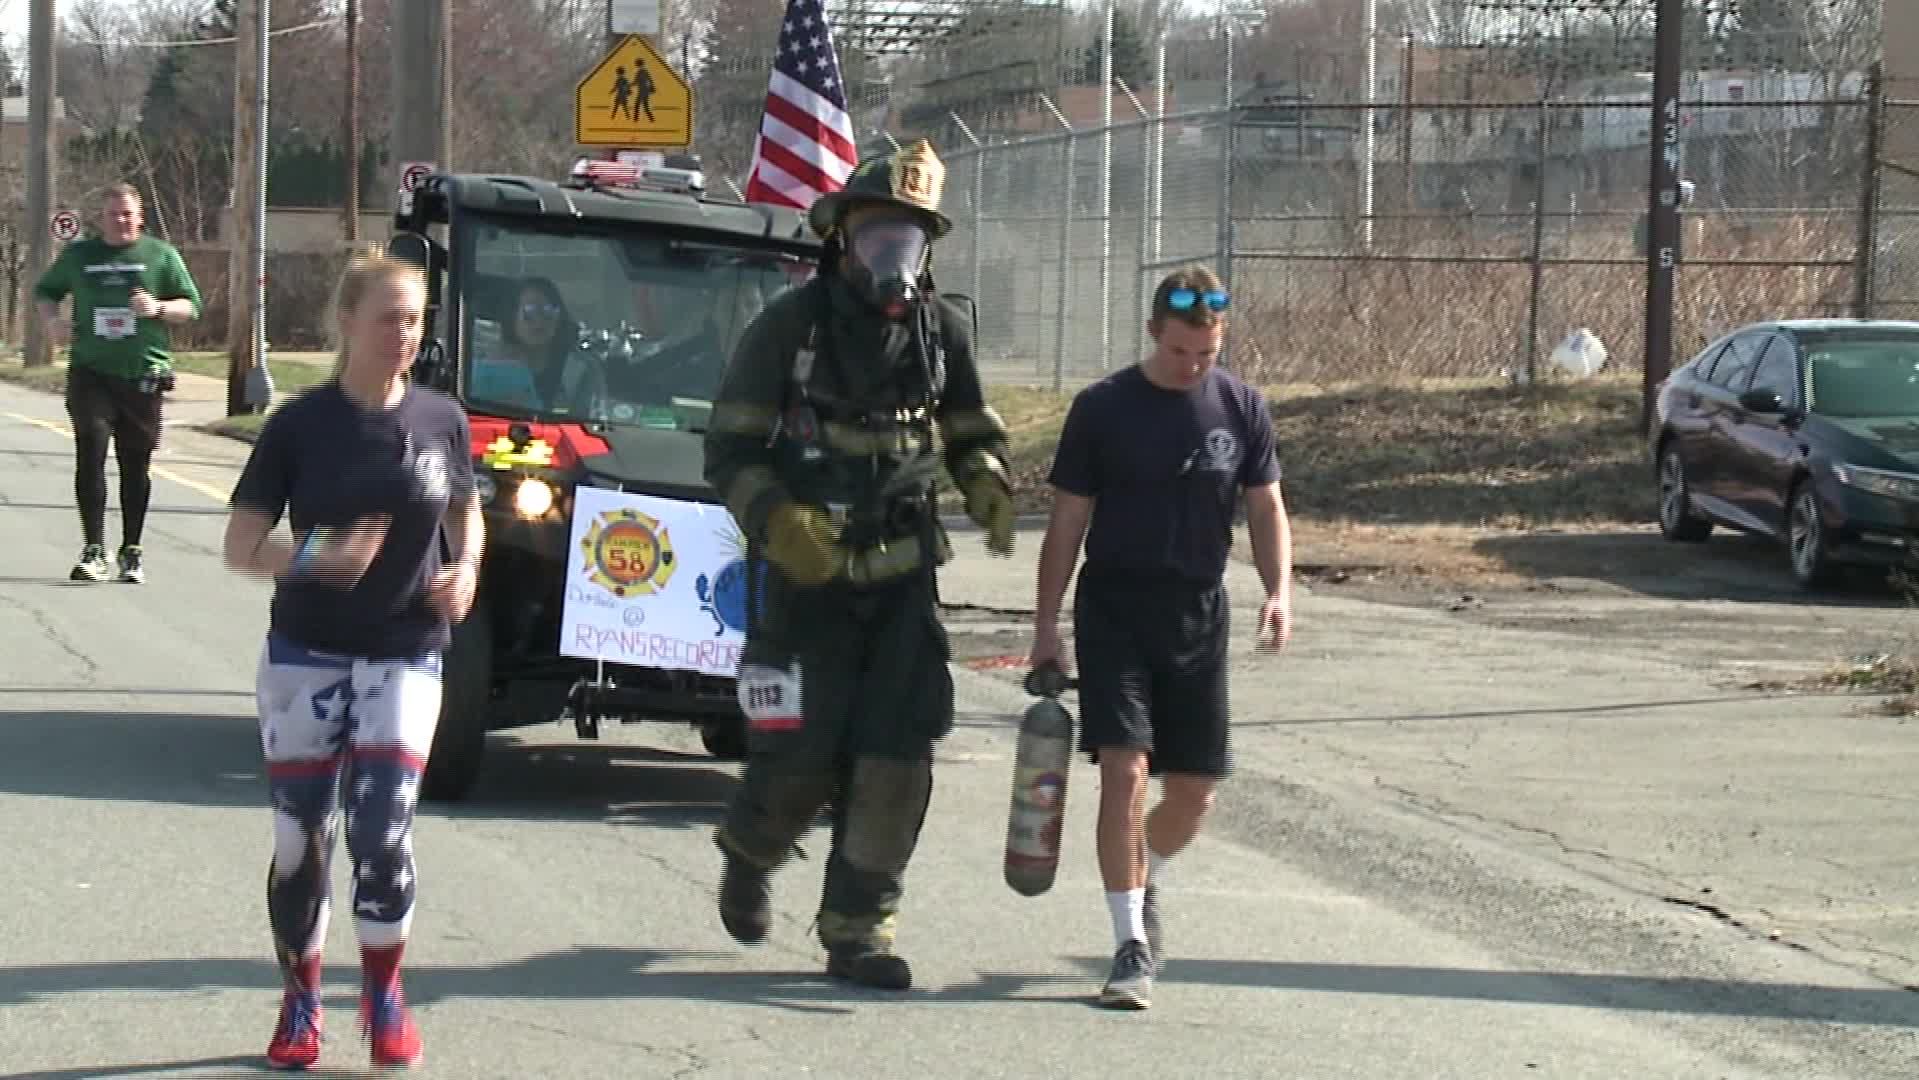 Ryan Robeson tried to set a Guinness World Record for running a half marathon in full firefighter gear. 